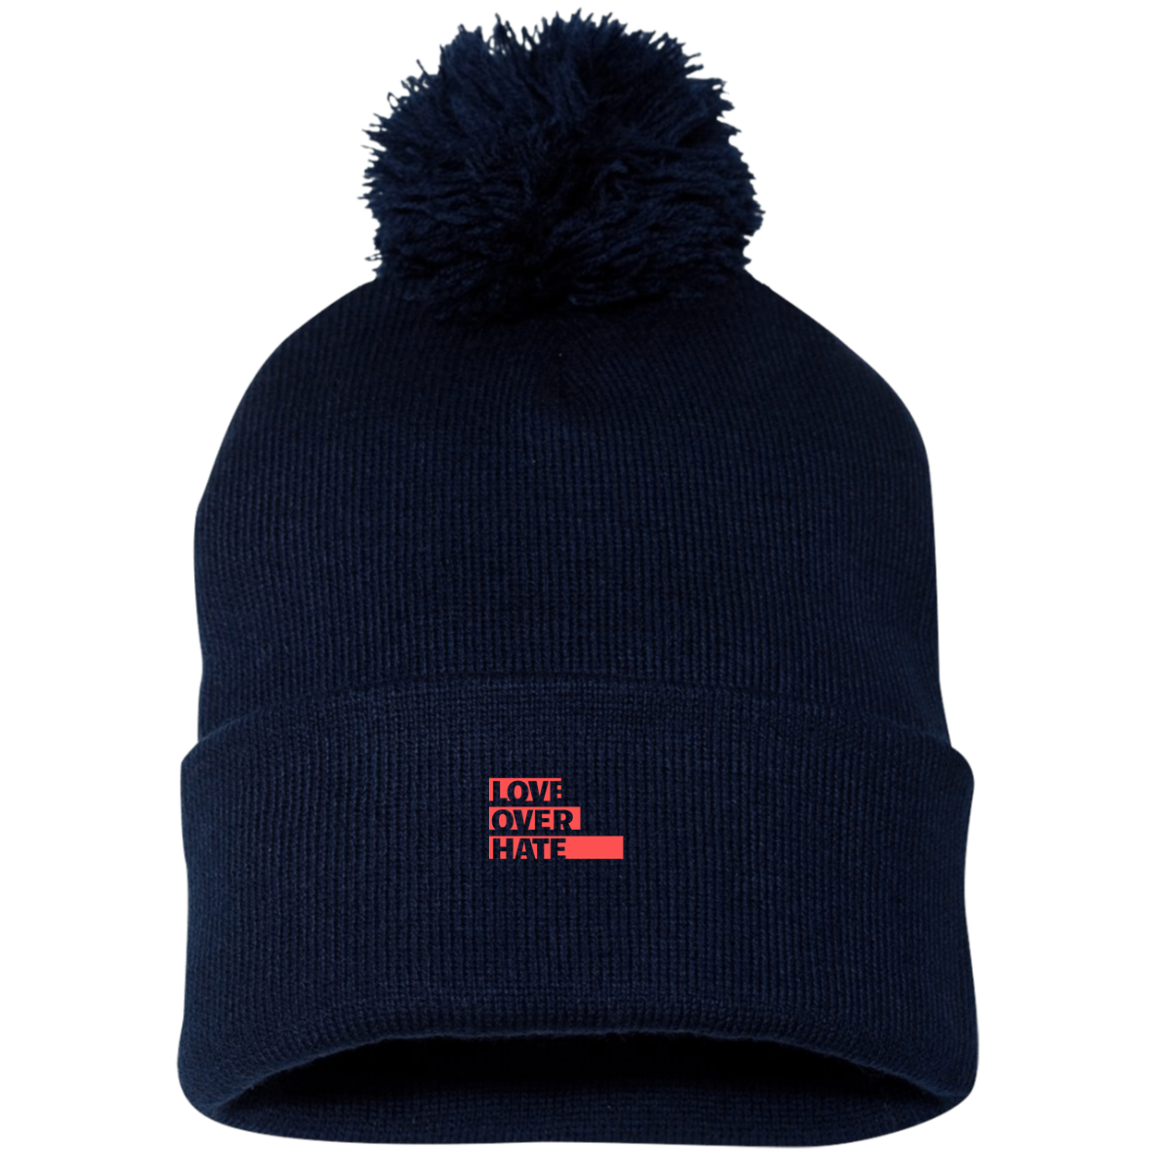 Love Over Hate Knit Cap